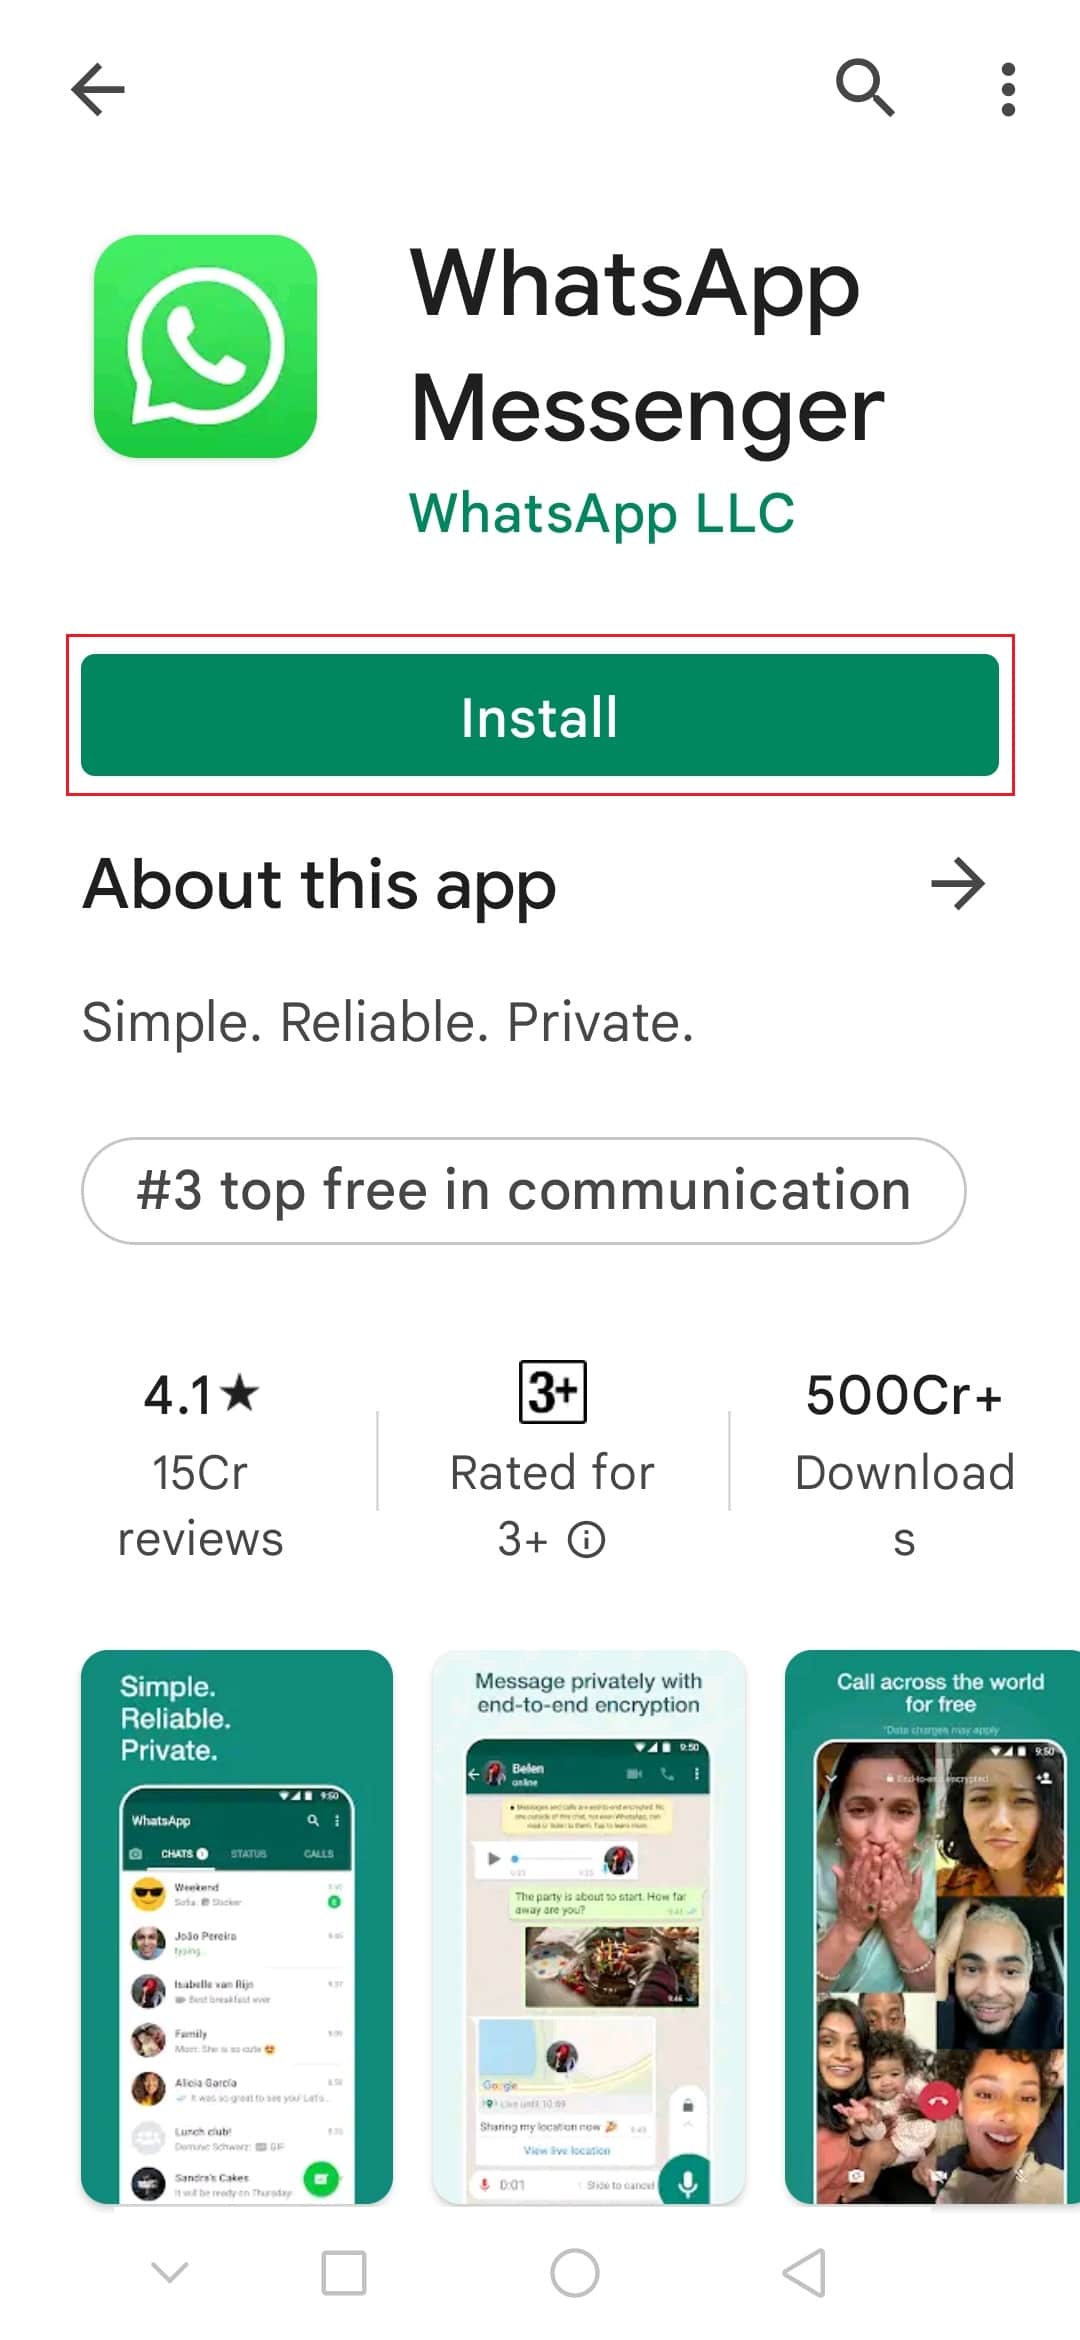 installer whatsapp i google play store android app